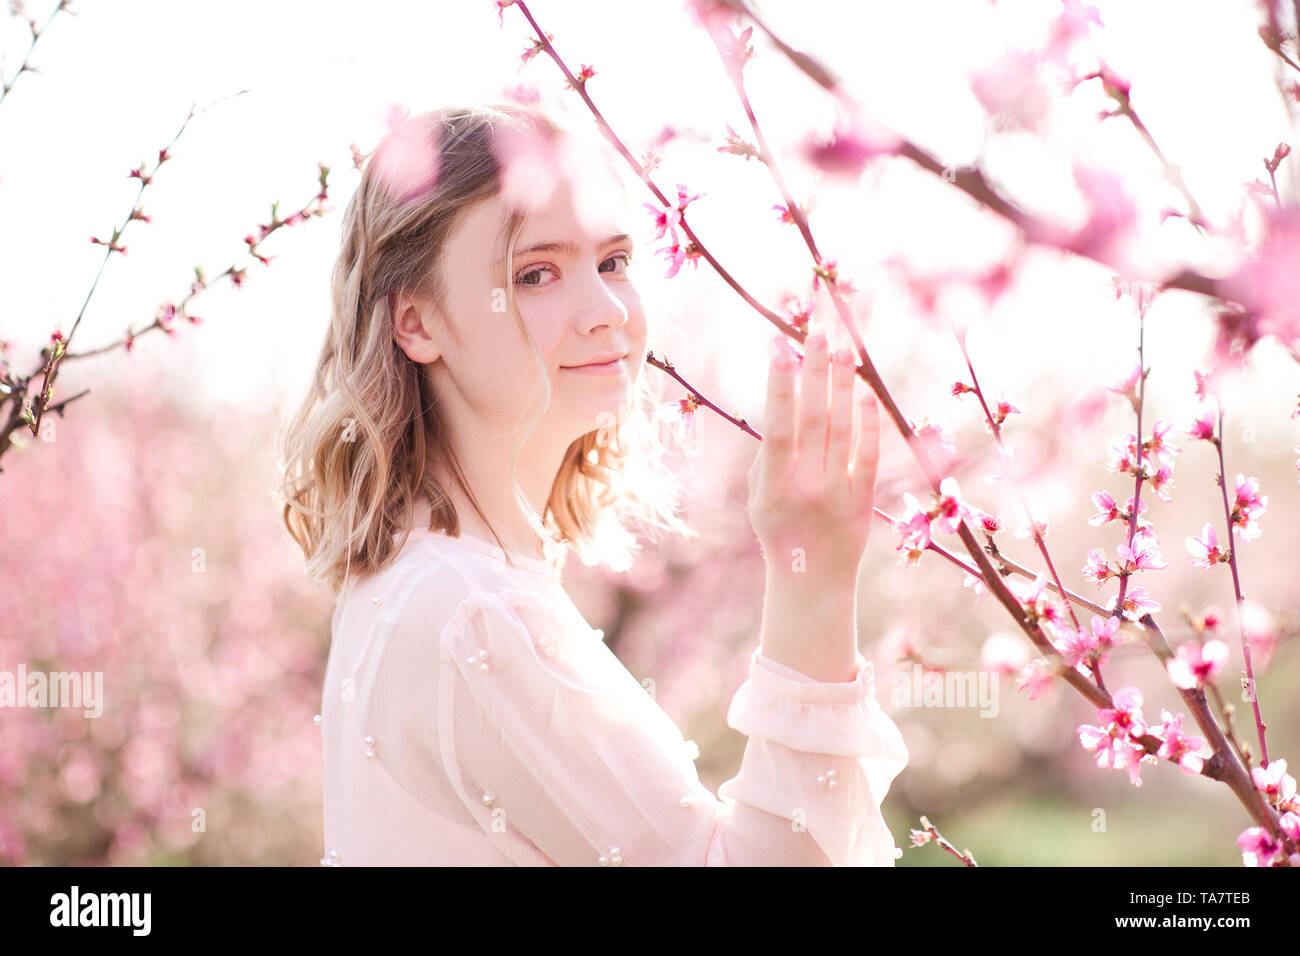 Smiling teen girl 16-17 year old posing in peach flowers outdoors. Looking at camera. Summer time. Stock Photo